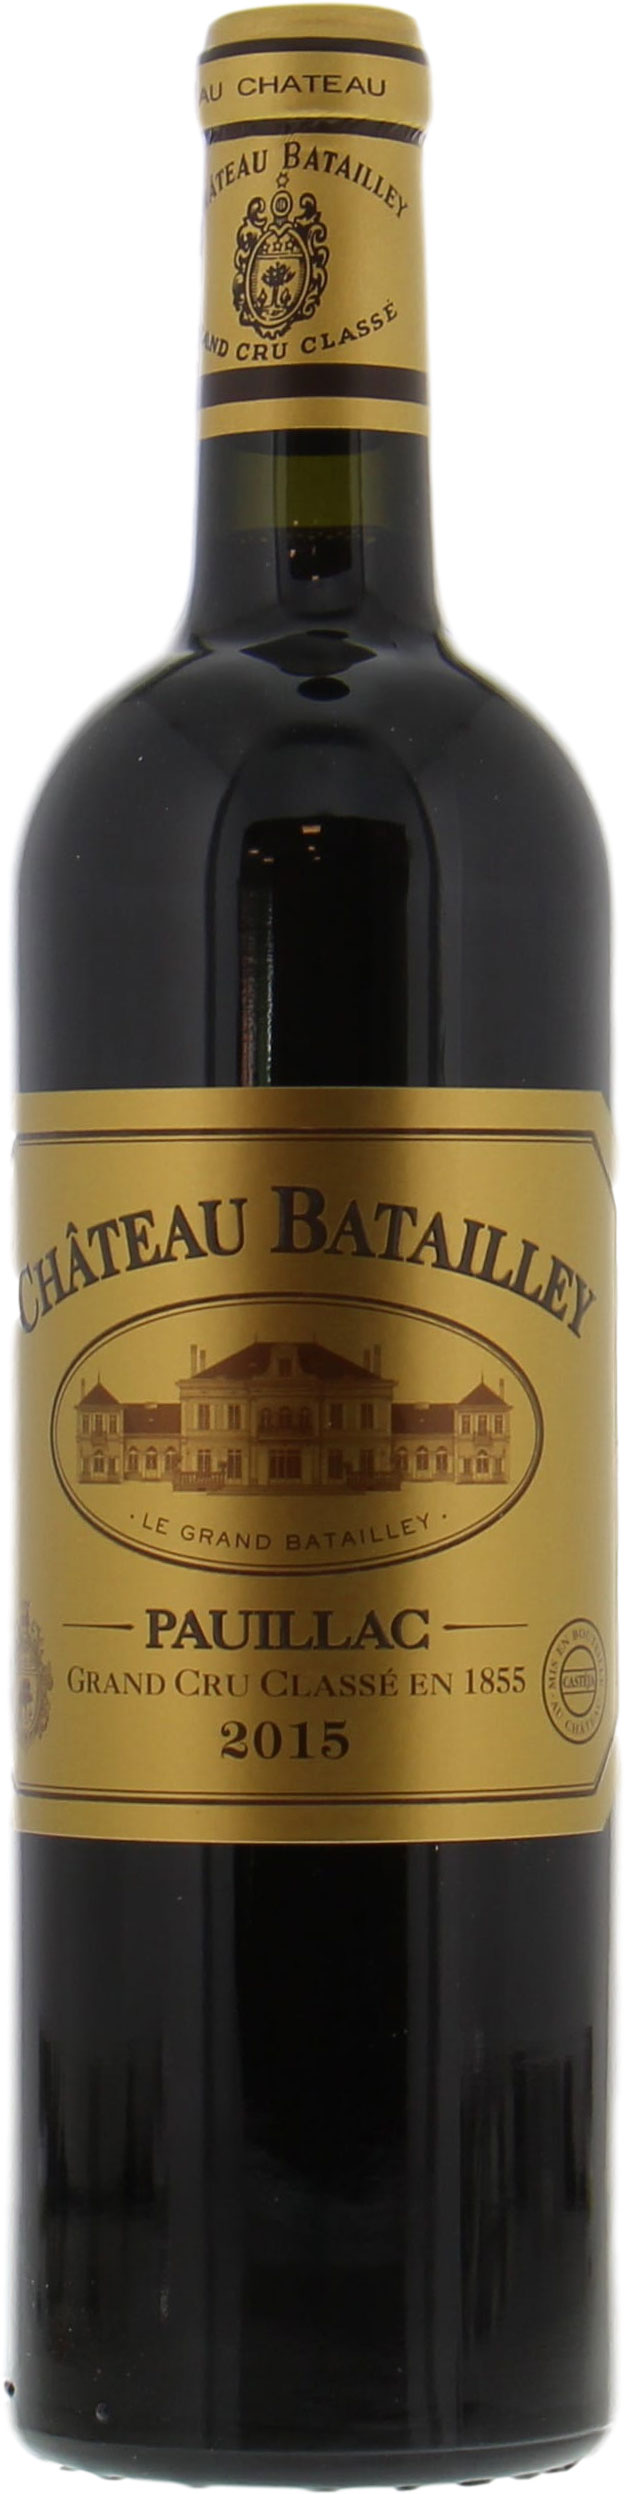 Chateau Batailley - Chateau Batailley 2015 Perfect